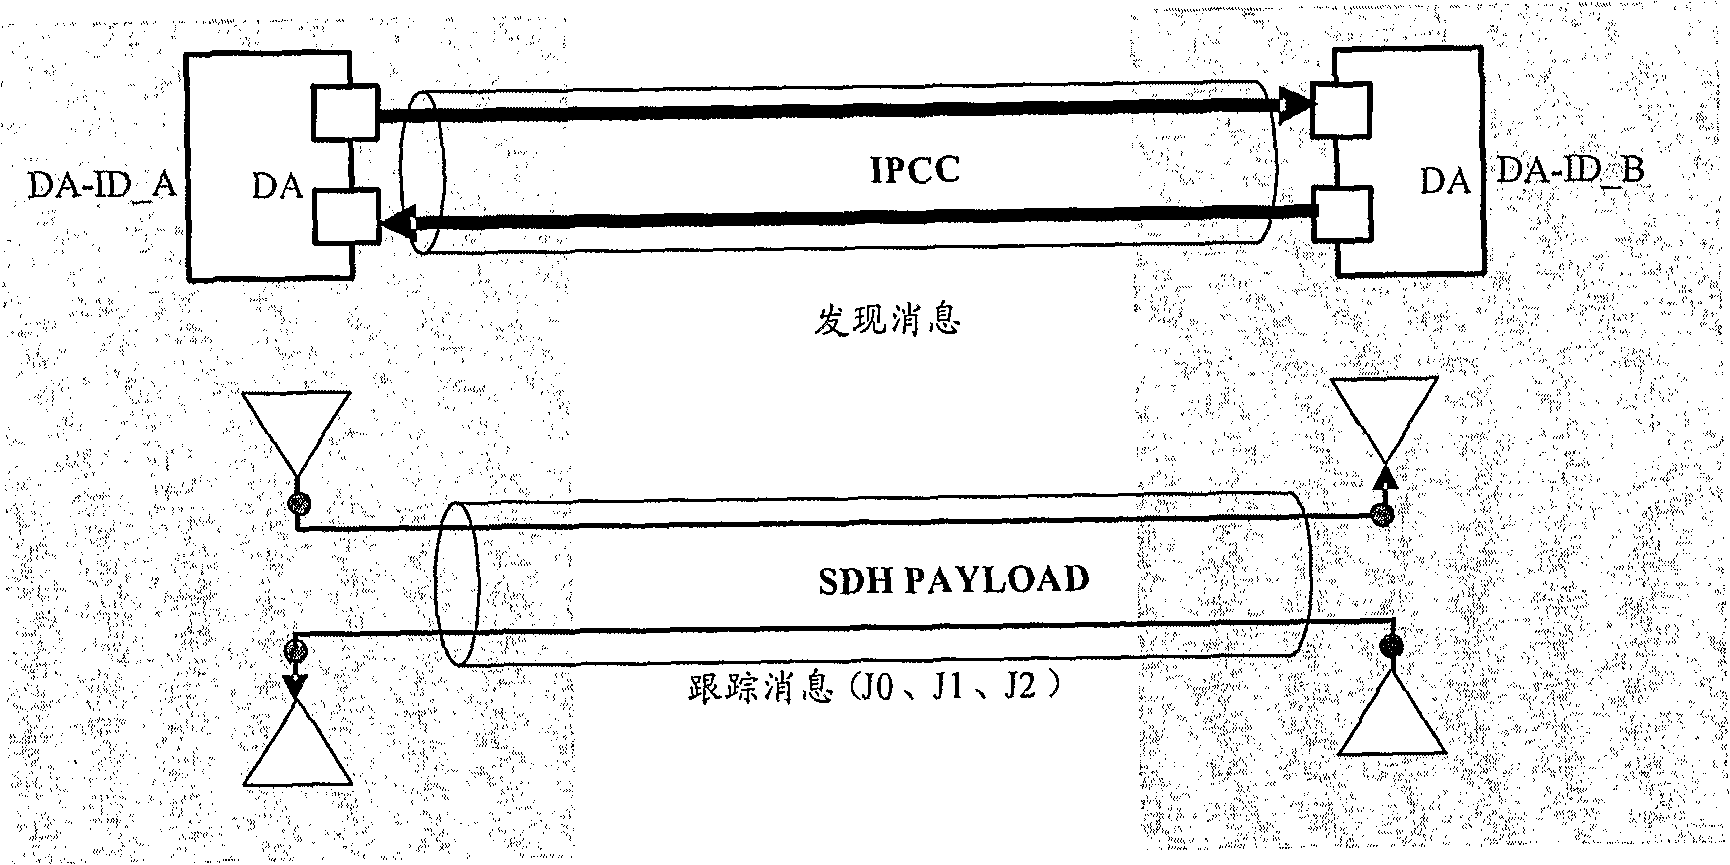 A method and apparatus for verifying connectivity of a data